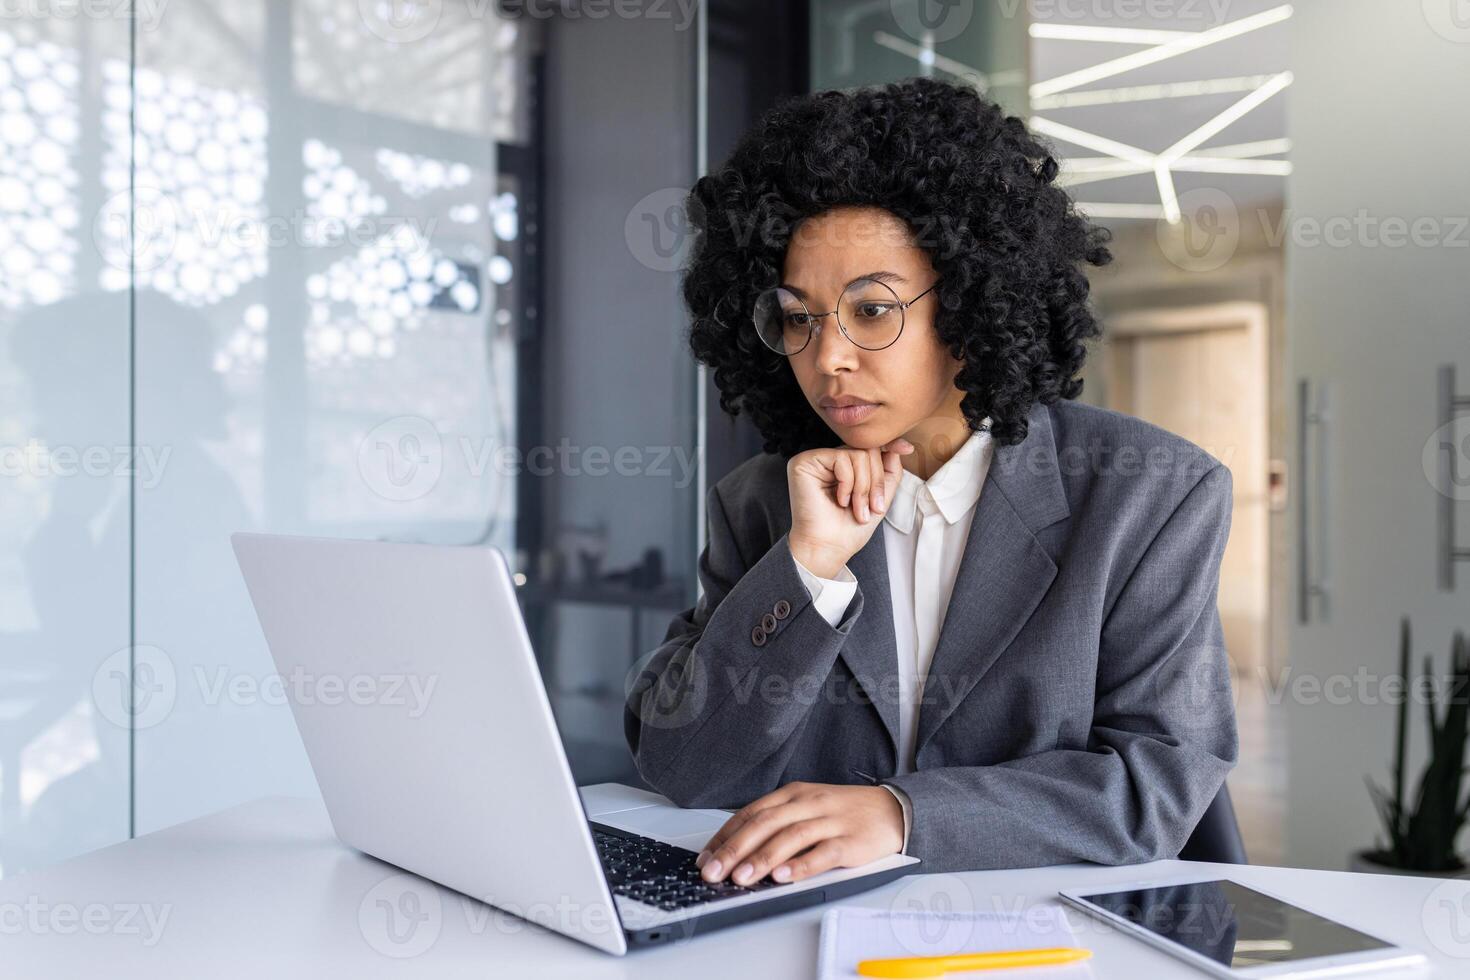 Serious concentrated and thinking businesswoman inside office at workplace typing on laptop, female boss working with computer, solving technical financial task. photo